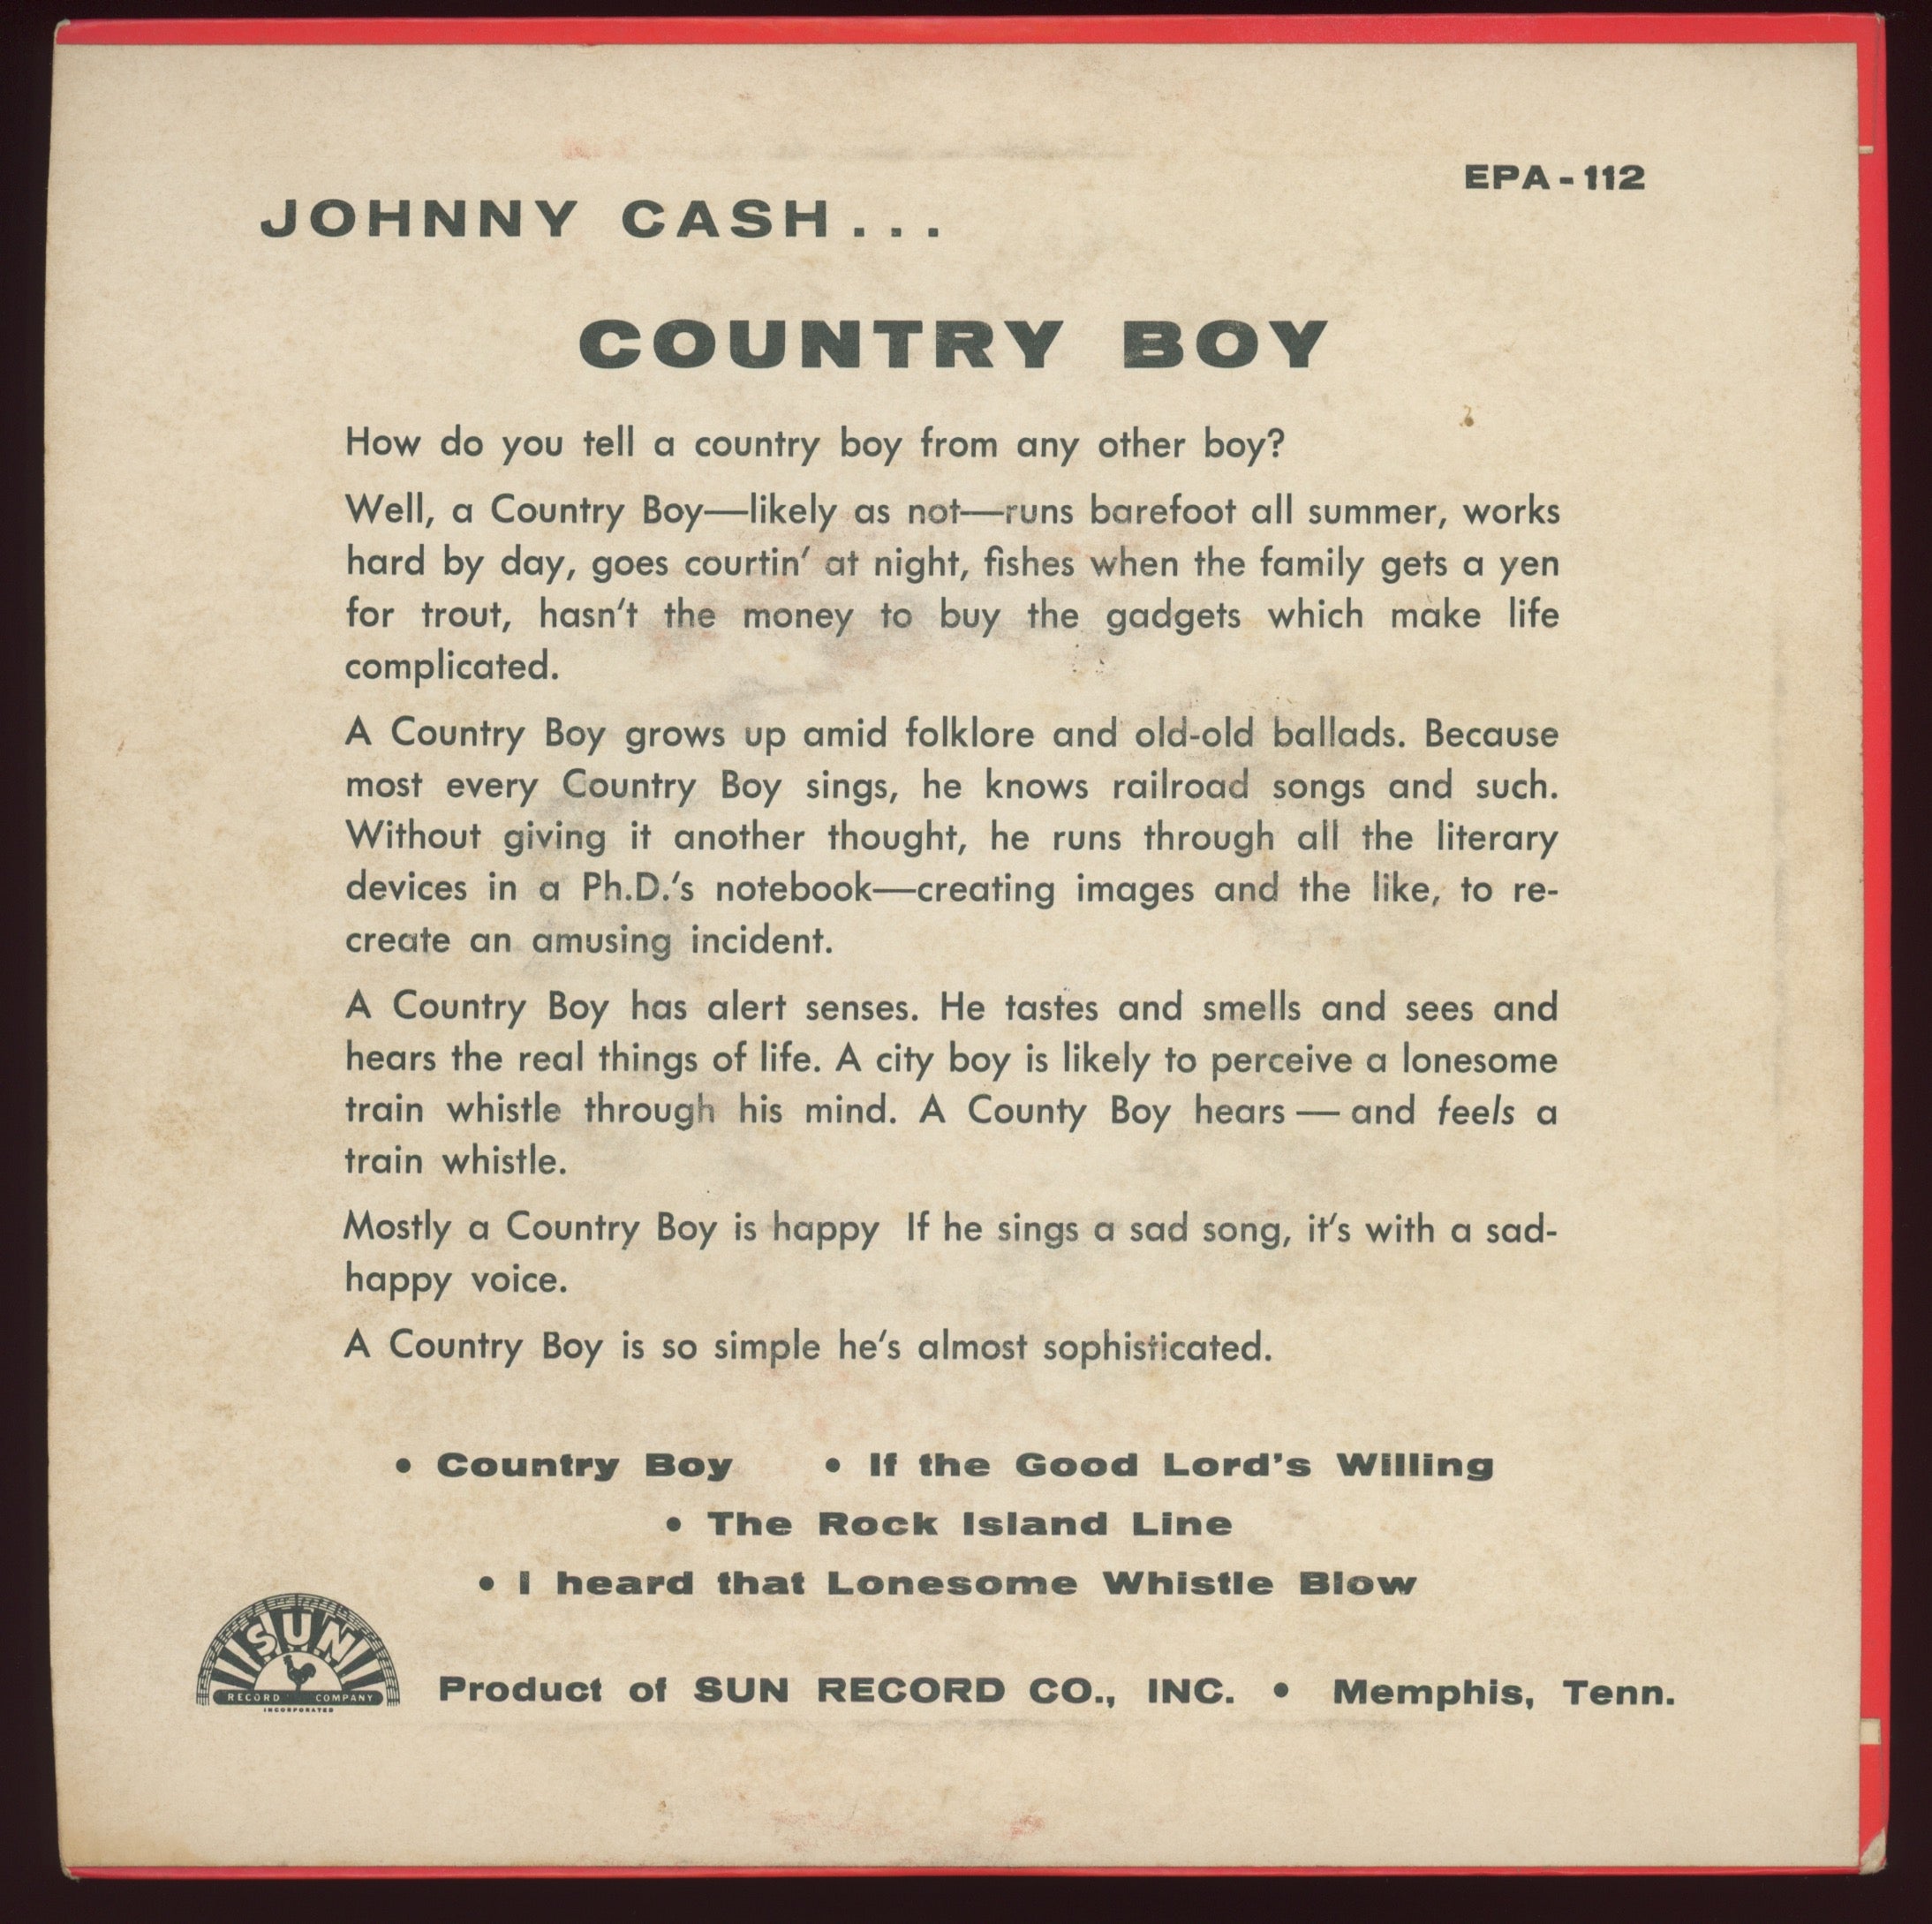 Johnny Cash - Country Boy on Sun EP 112 With Cover